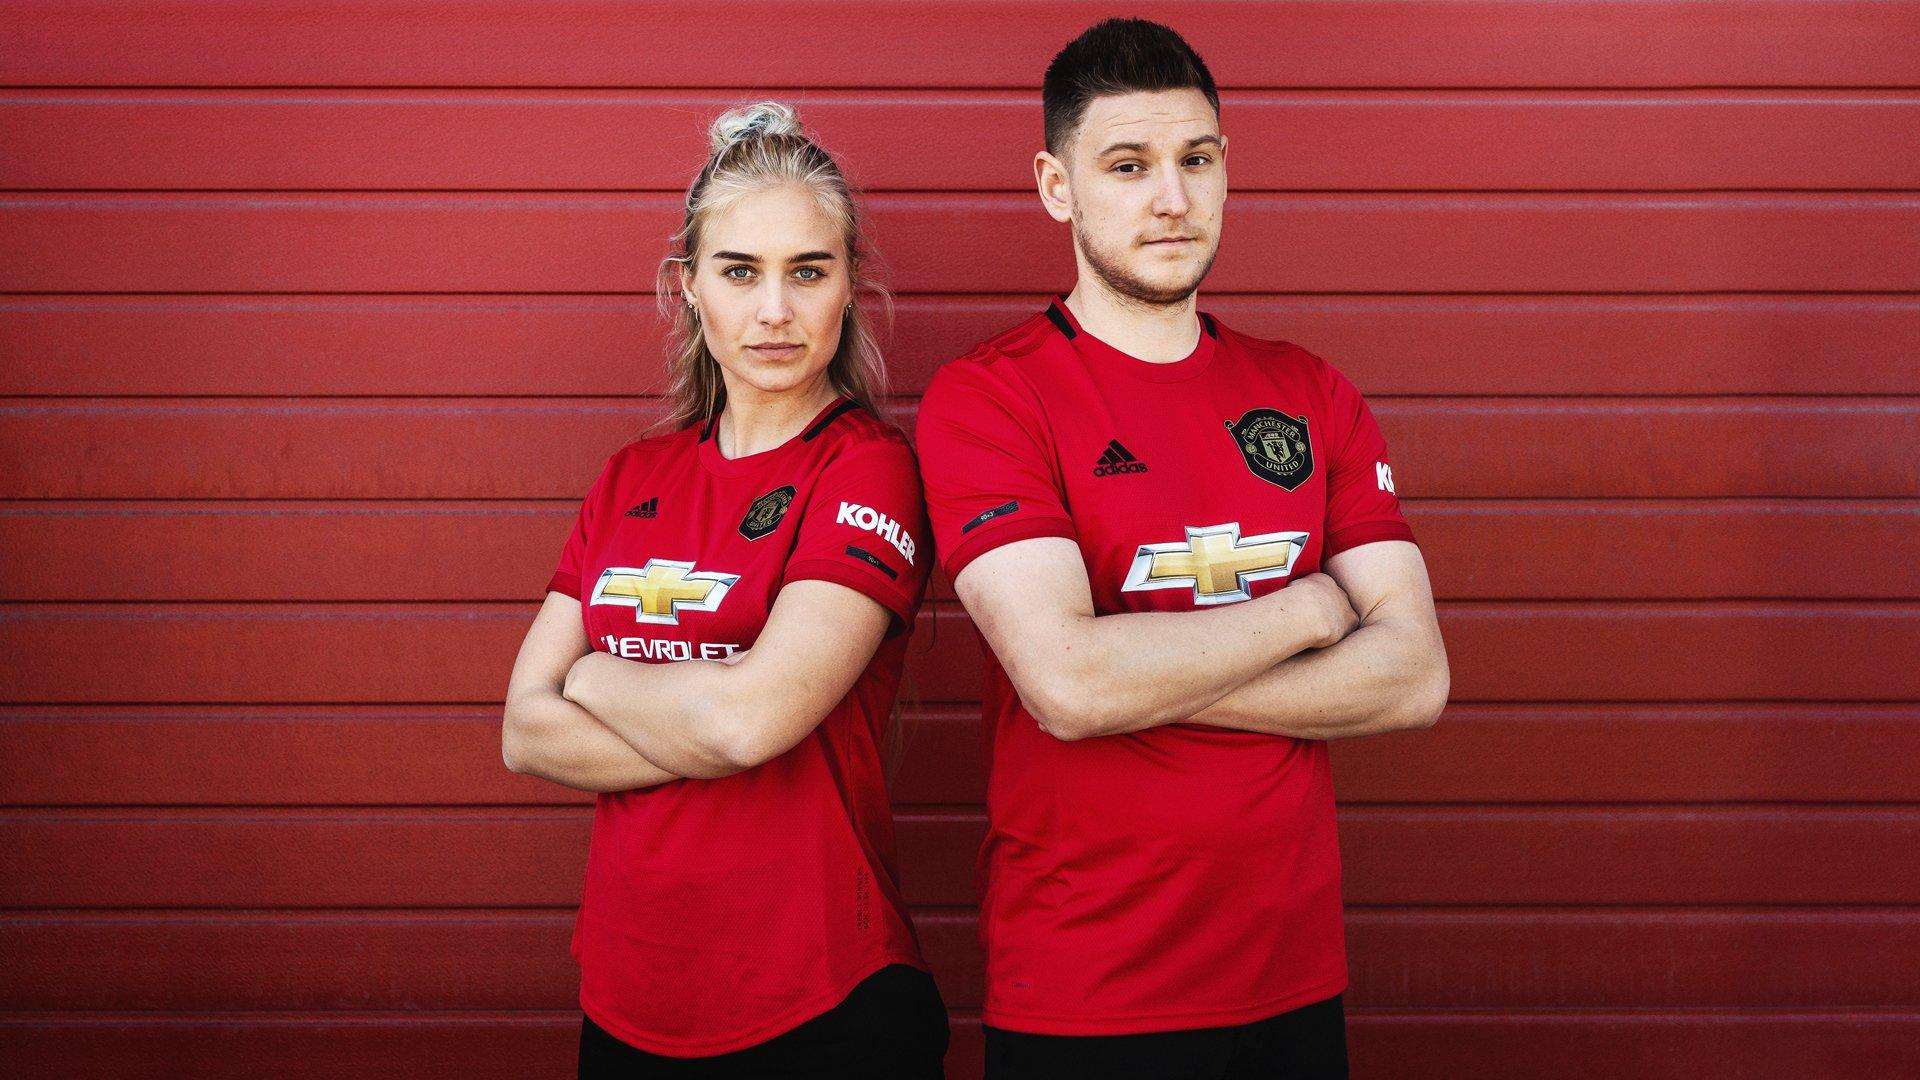 Celebrate The '99 Treble With The 2019 20 Manchester United Home Kit